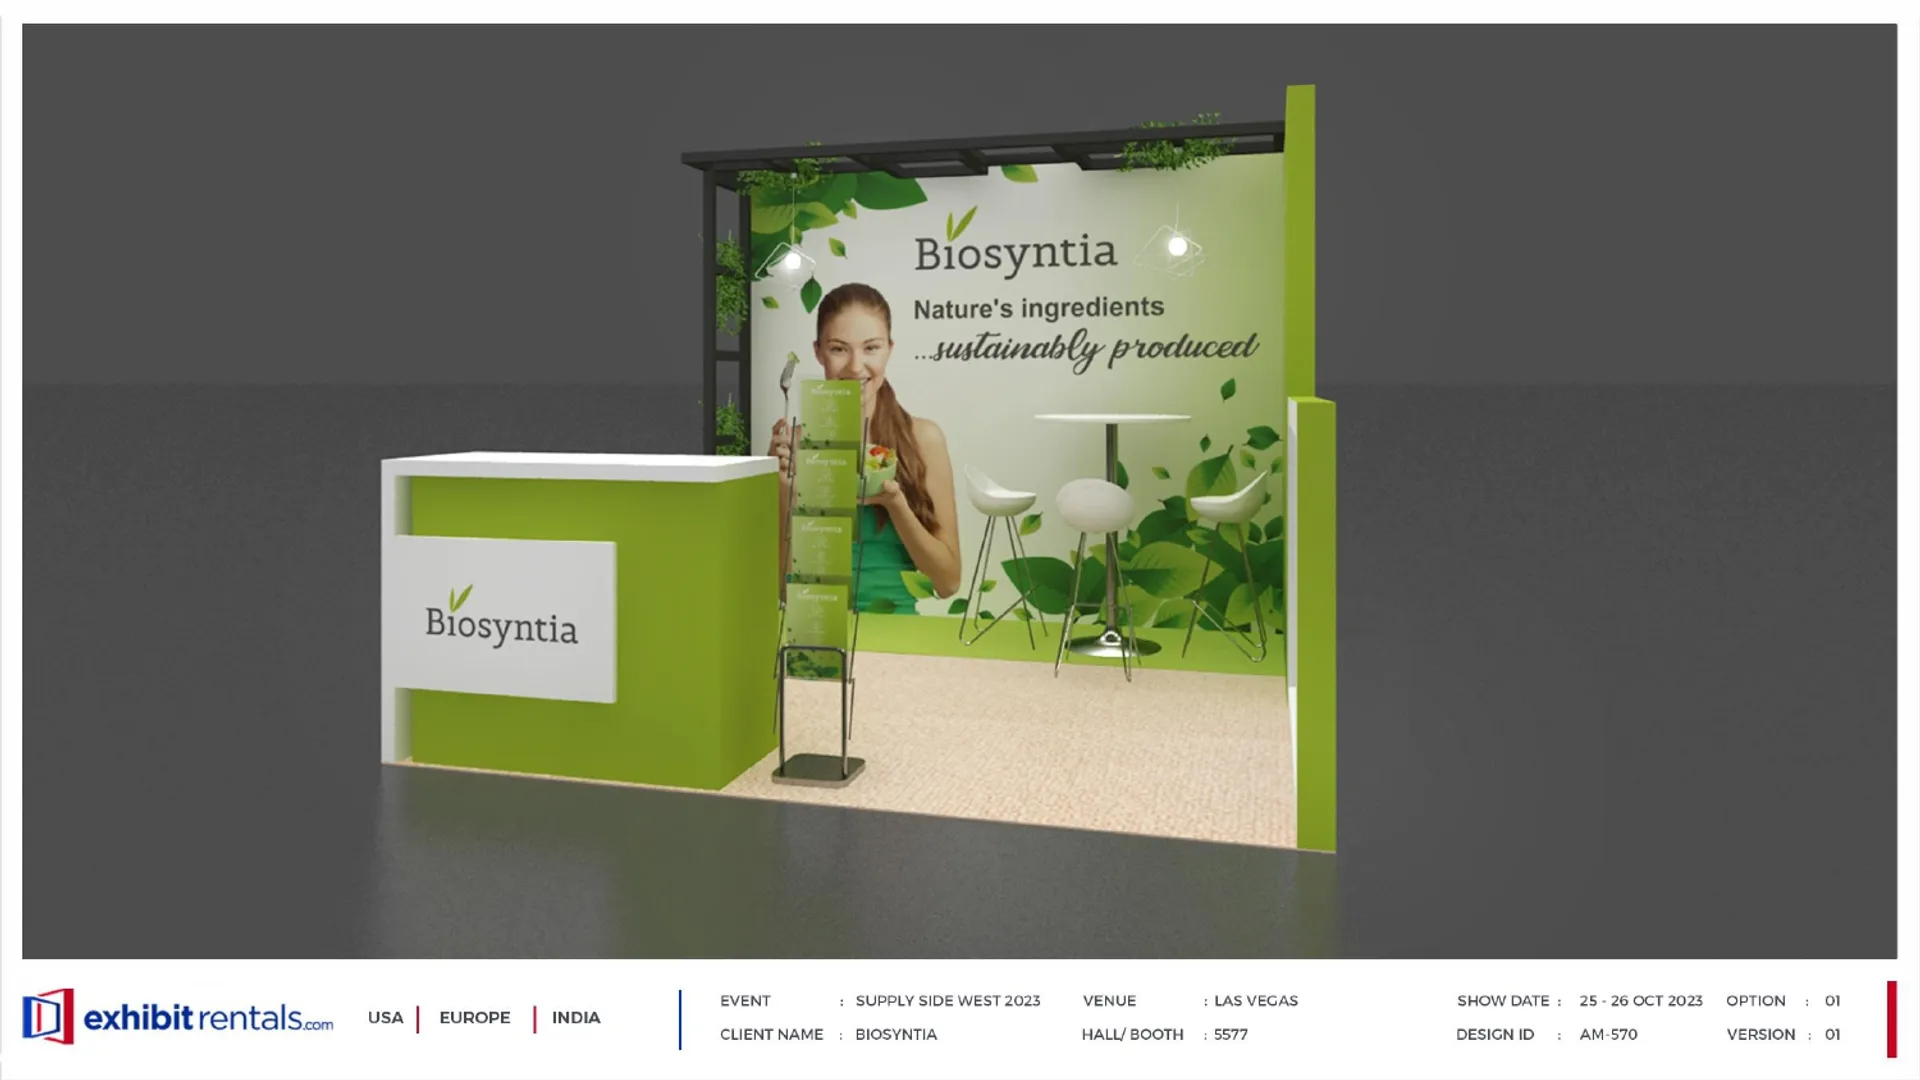 booth-design-projects/Exhibit-Rentals/2024-04-18-10x10-PERIMETER-Project-91/1.1_Biosyntia_Supply Side West 2023_ER Design presentation-15_page-0001-74mwxv.jpg